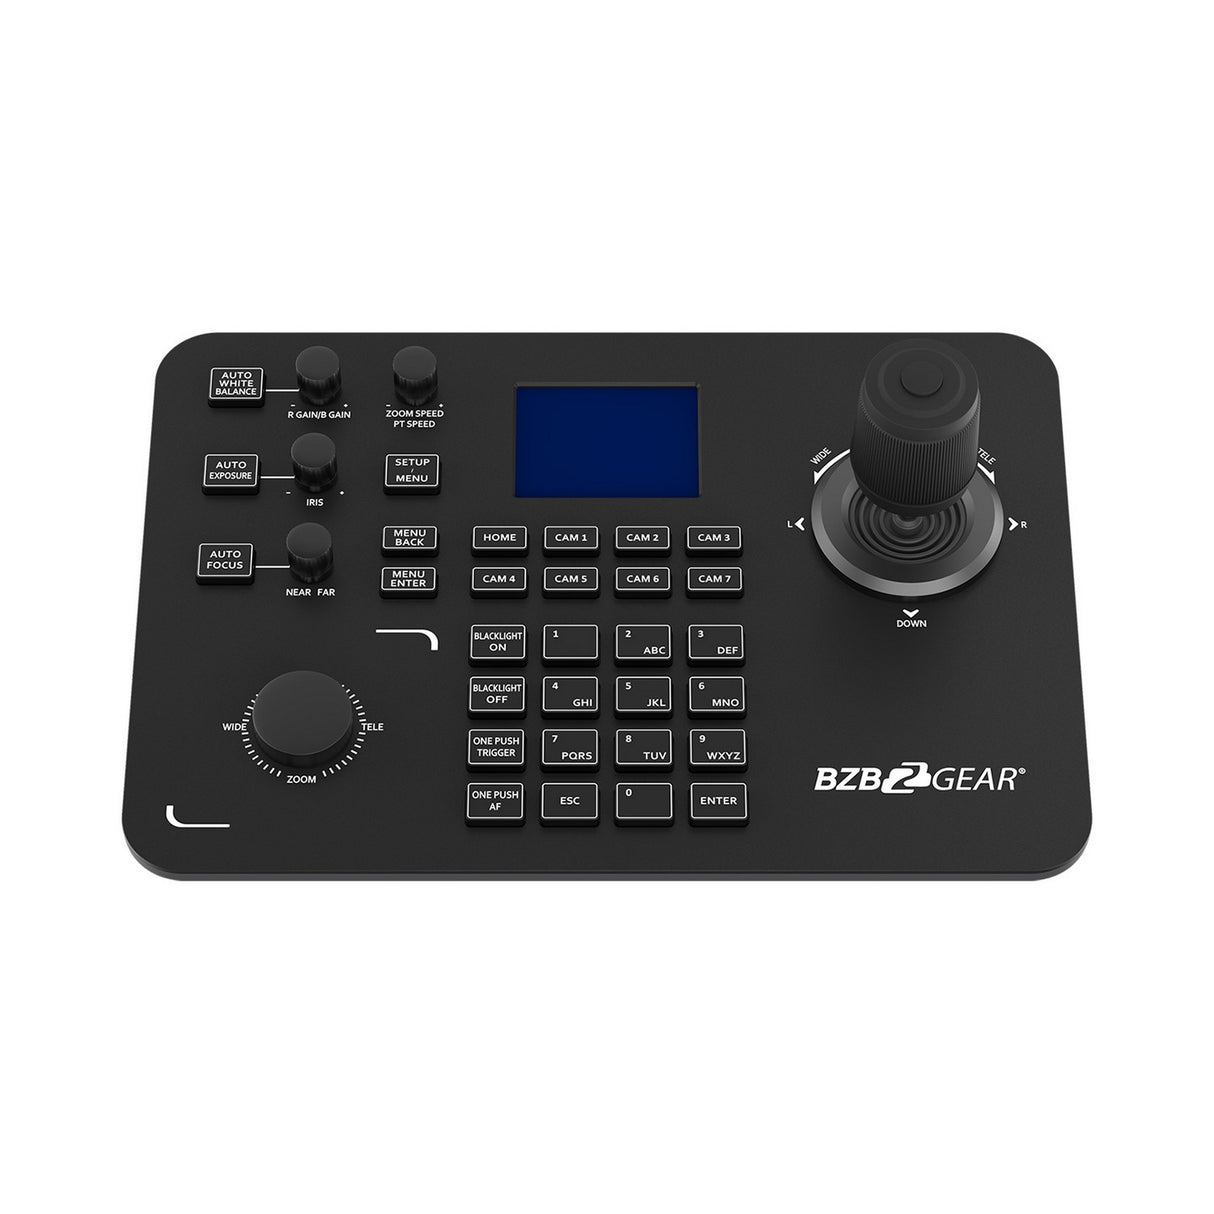 BZBGEAR BG-Commander Universal Advanced Serial and IP PTZ Joystick Controller with POE, IP/RS-232/422/485